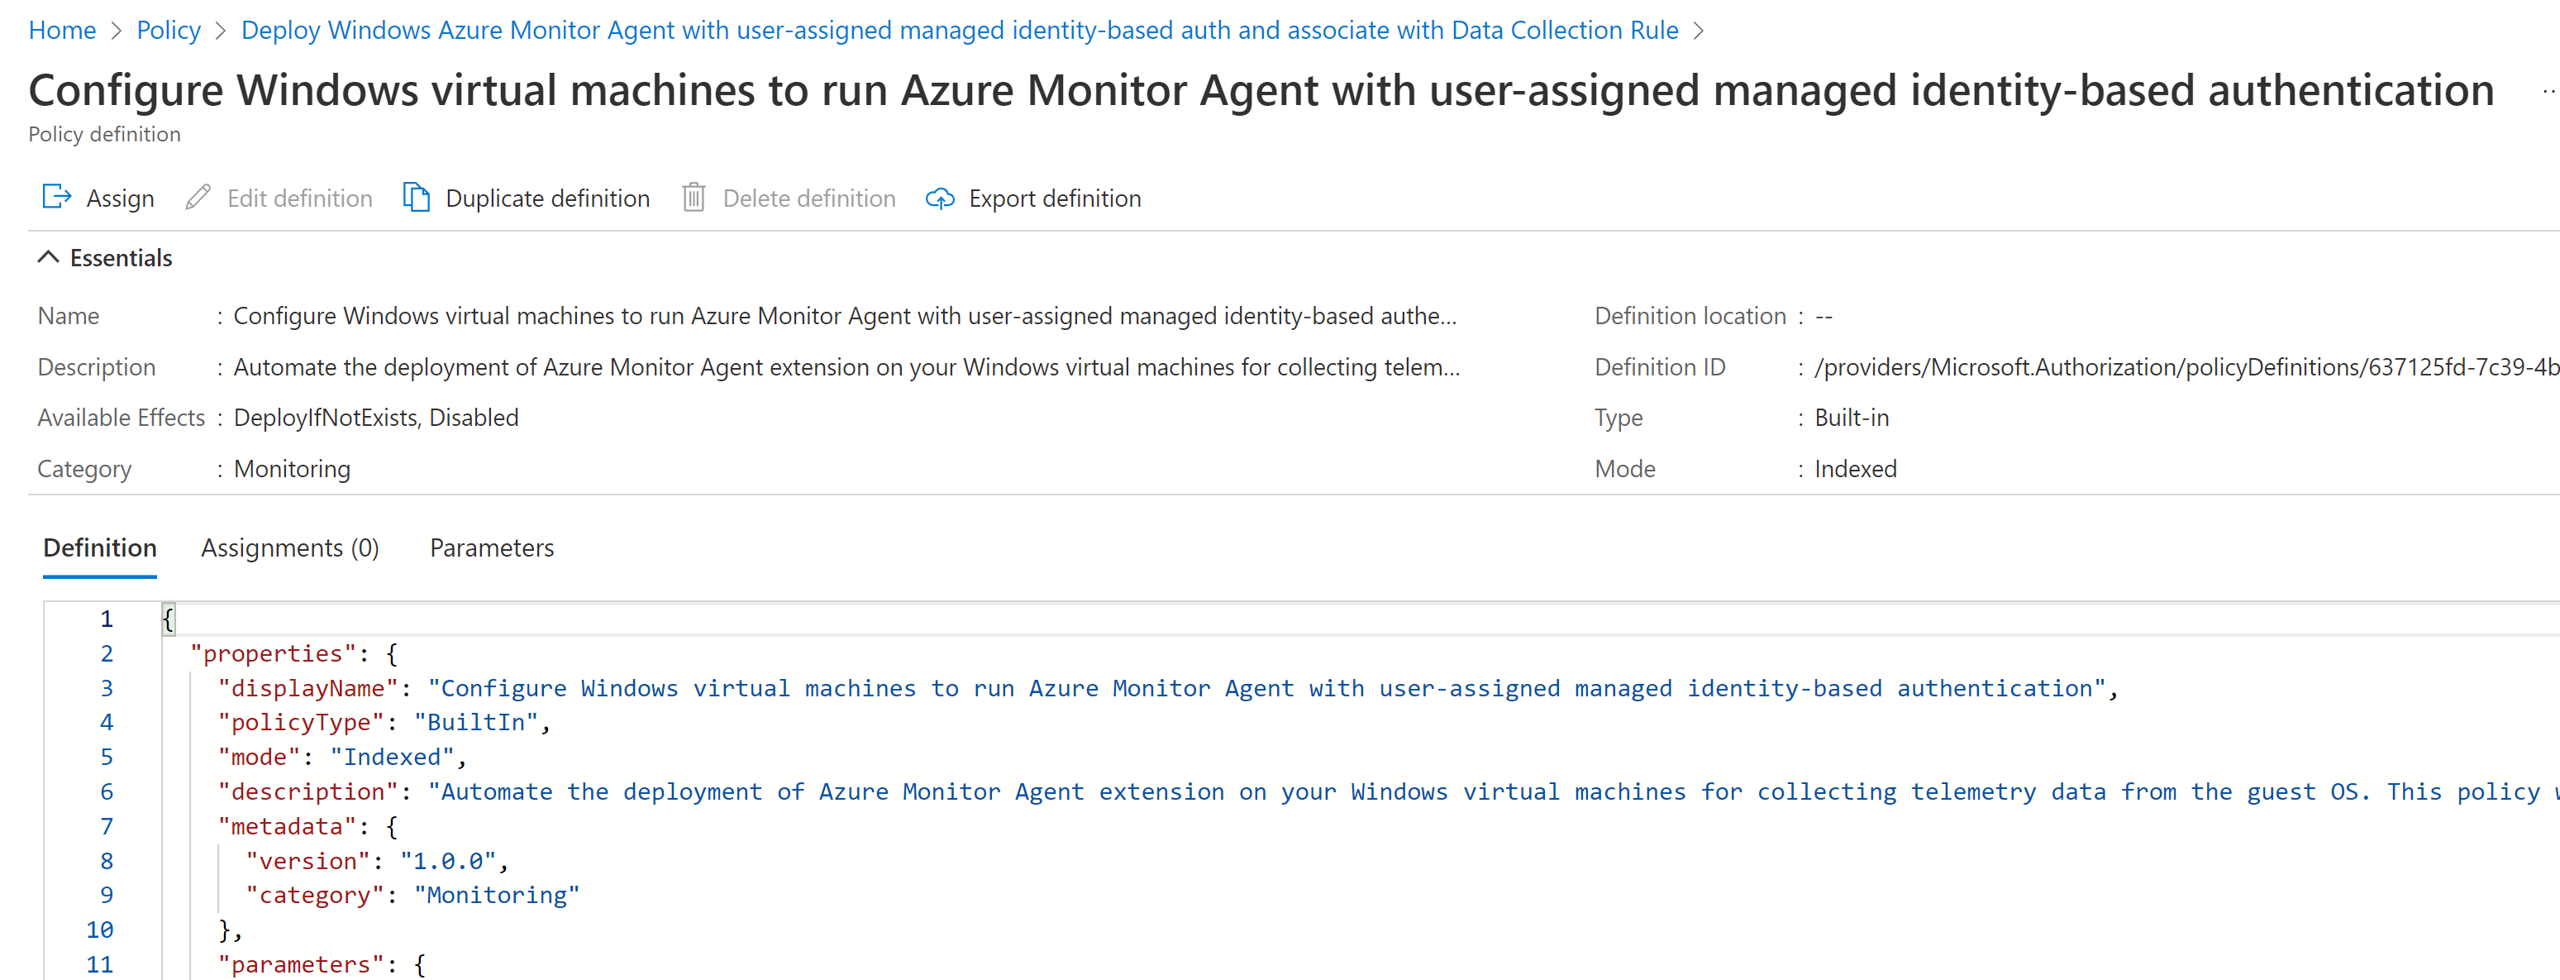 Partial screenshot from the Azure Policy Definitions page that shows policies contained within the initiative for configuring the Azure Monitor agent.